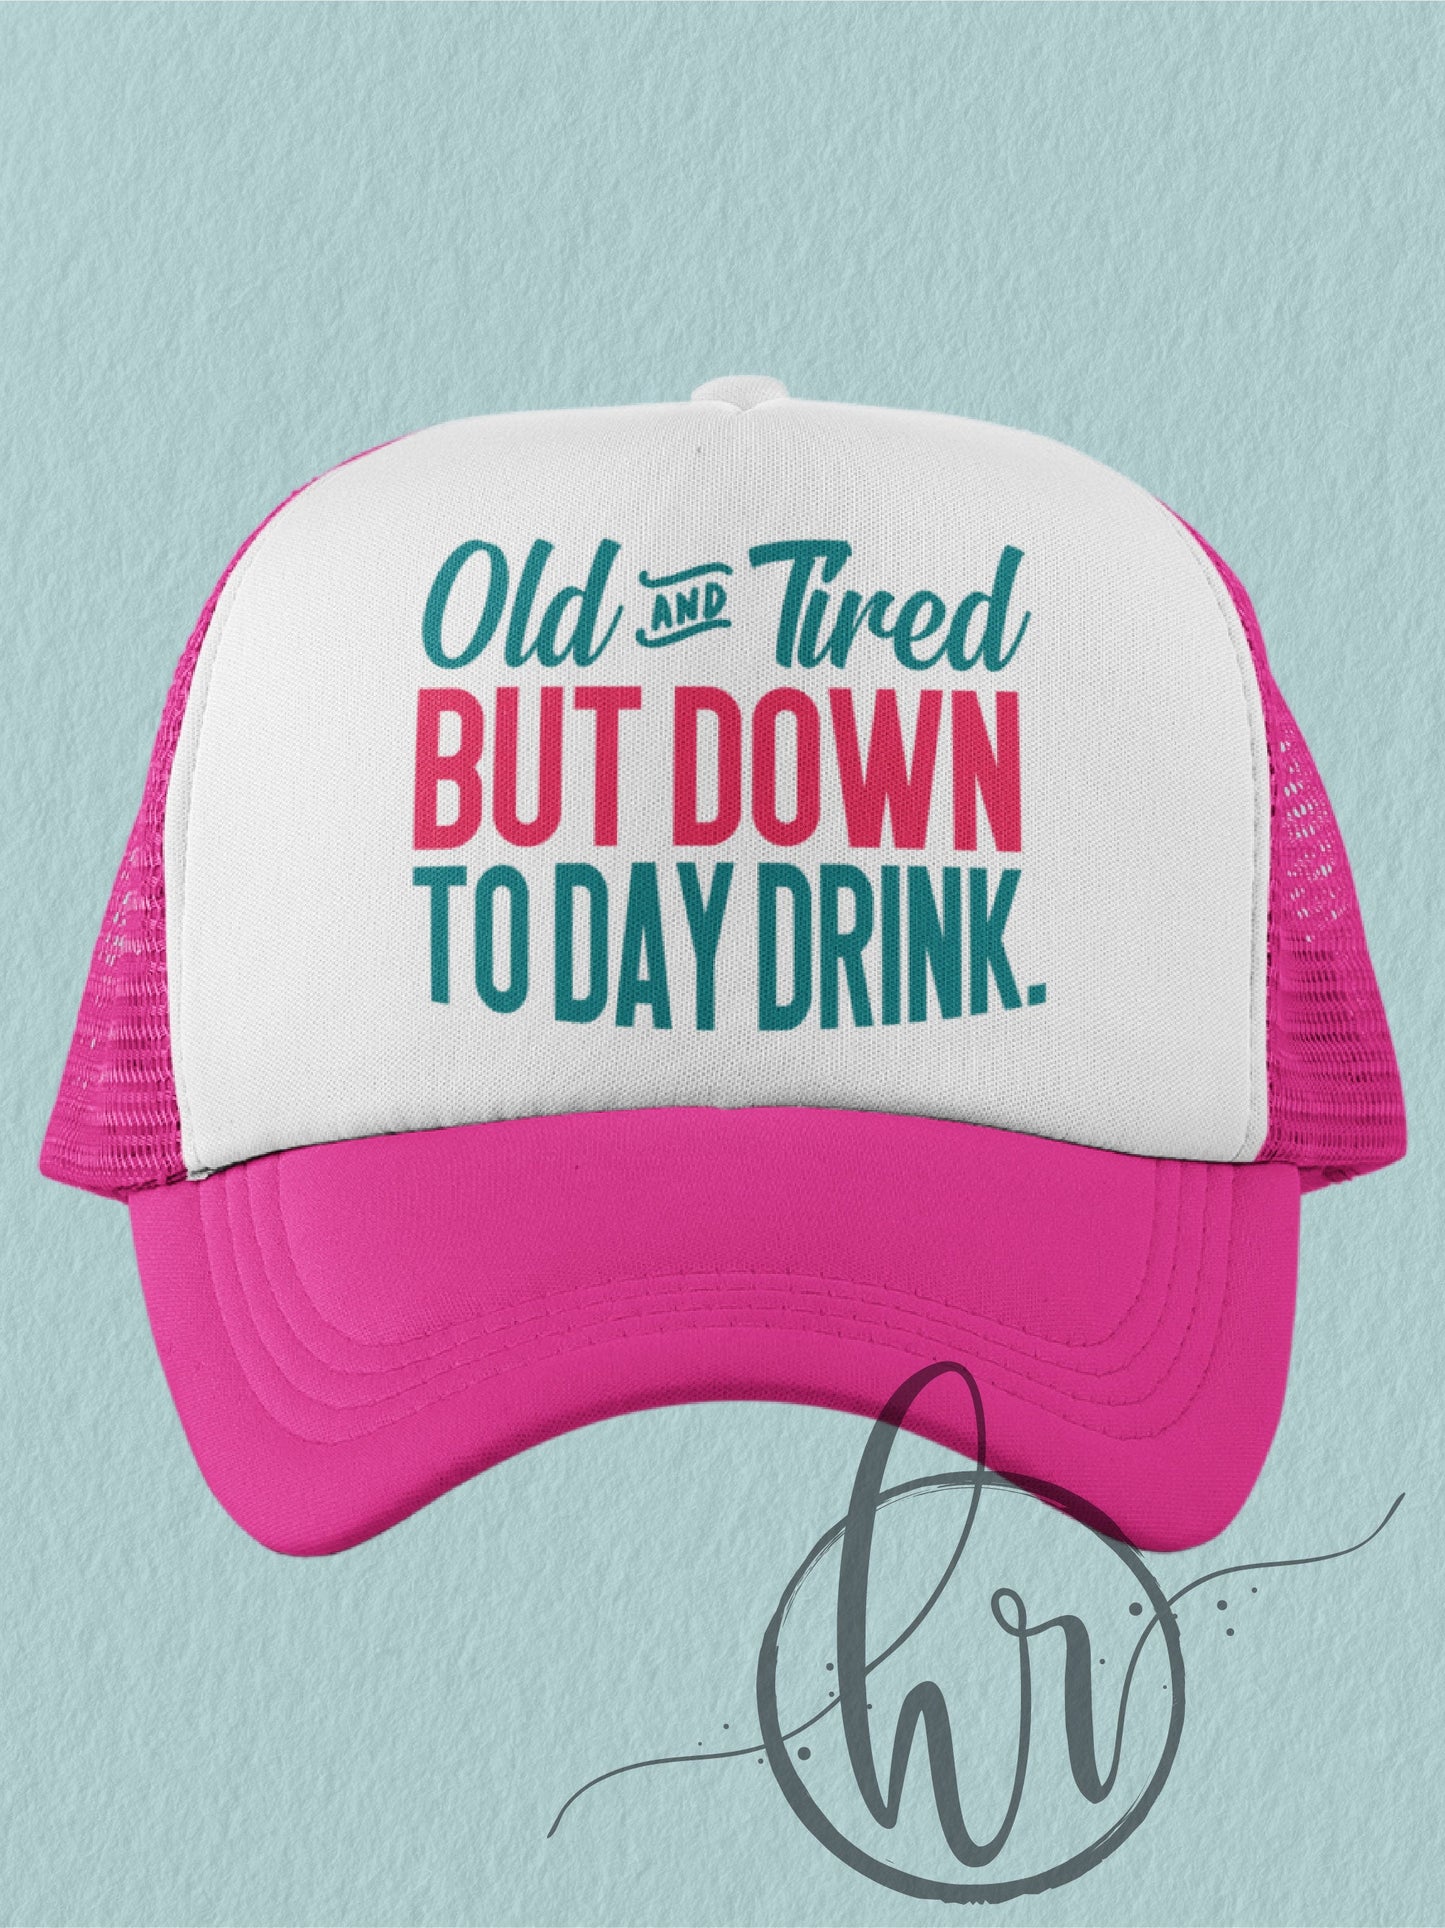 Old And Tired But Down To Day Drink - (Hat)